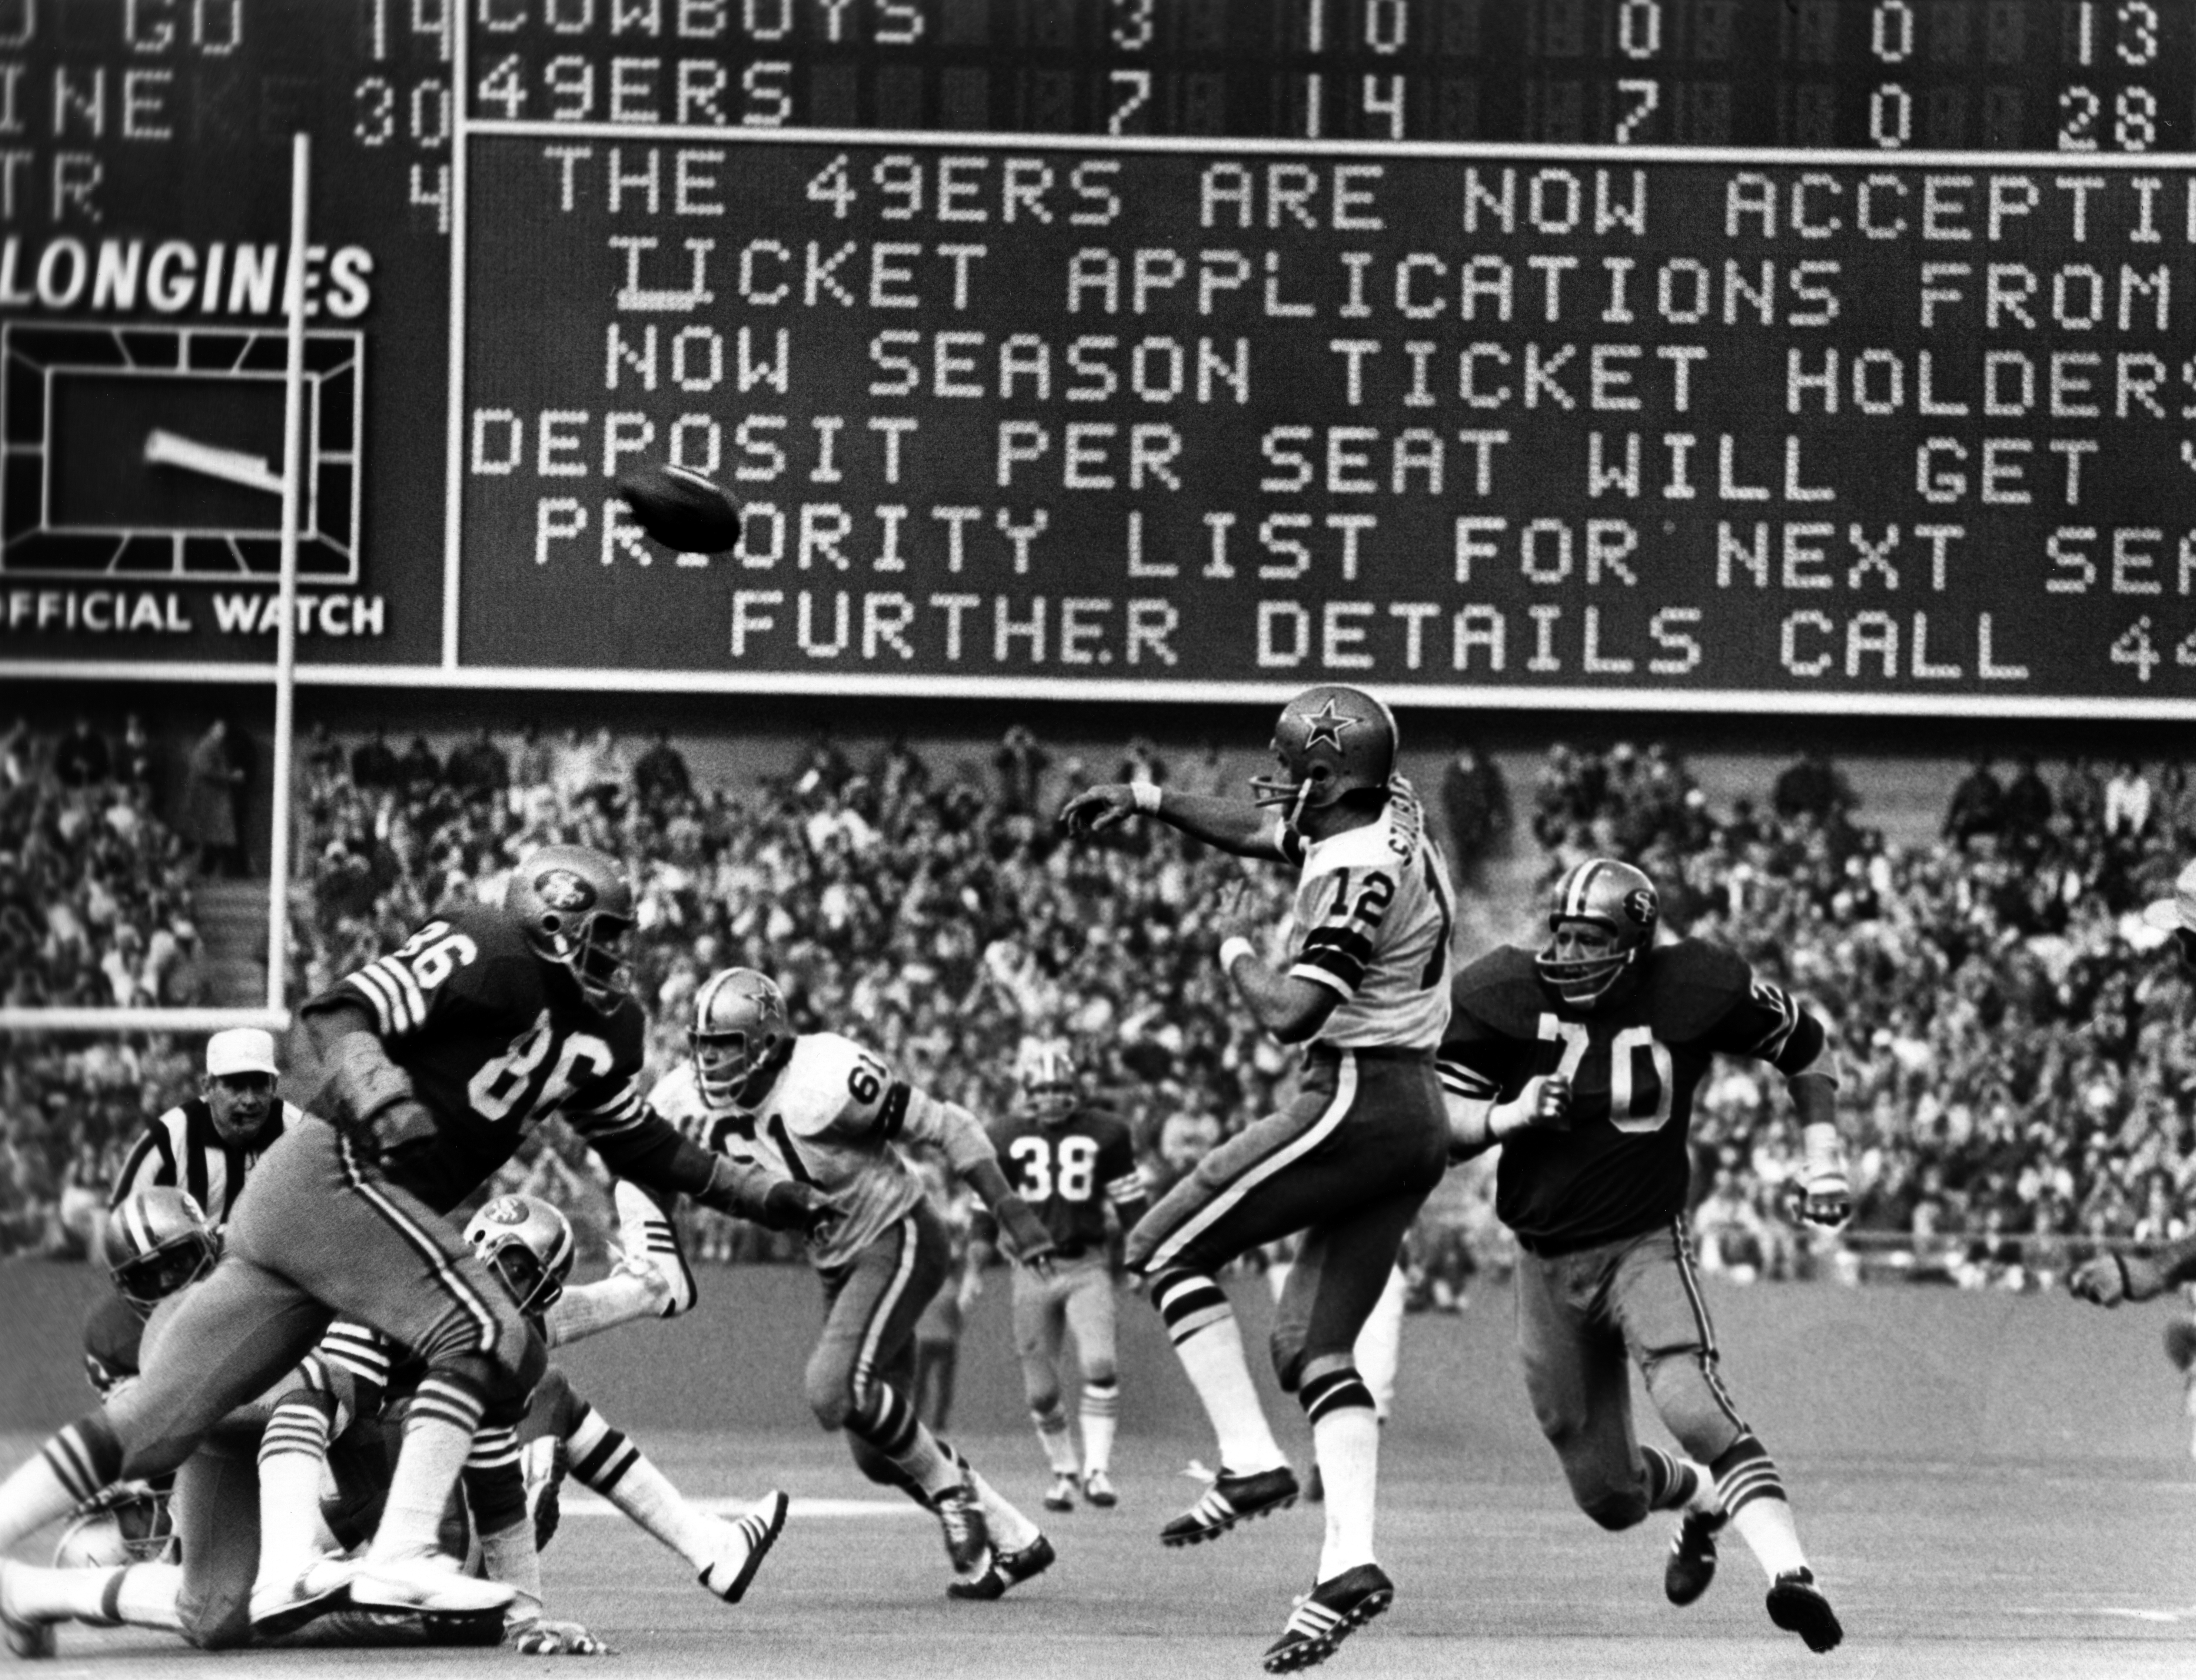 Roger Staubach leads a fourth-quarter comeback against the 49ers in 1972